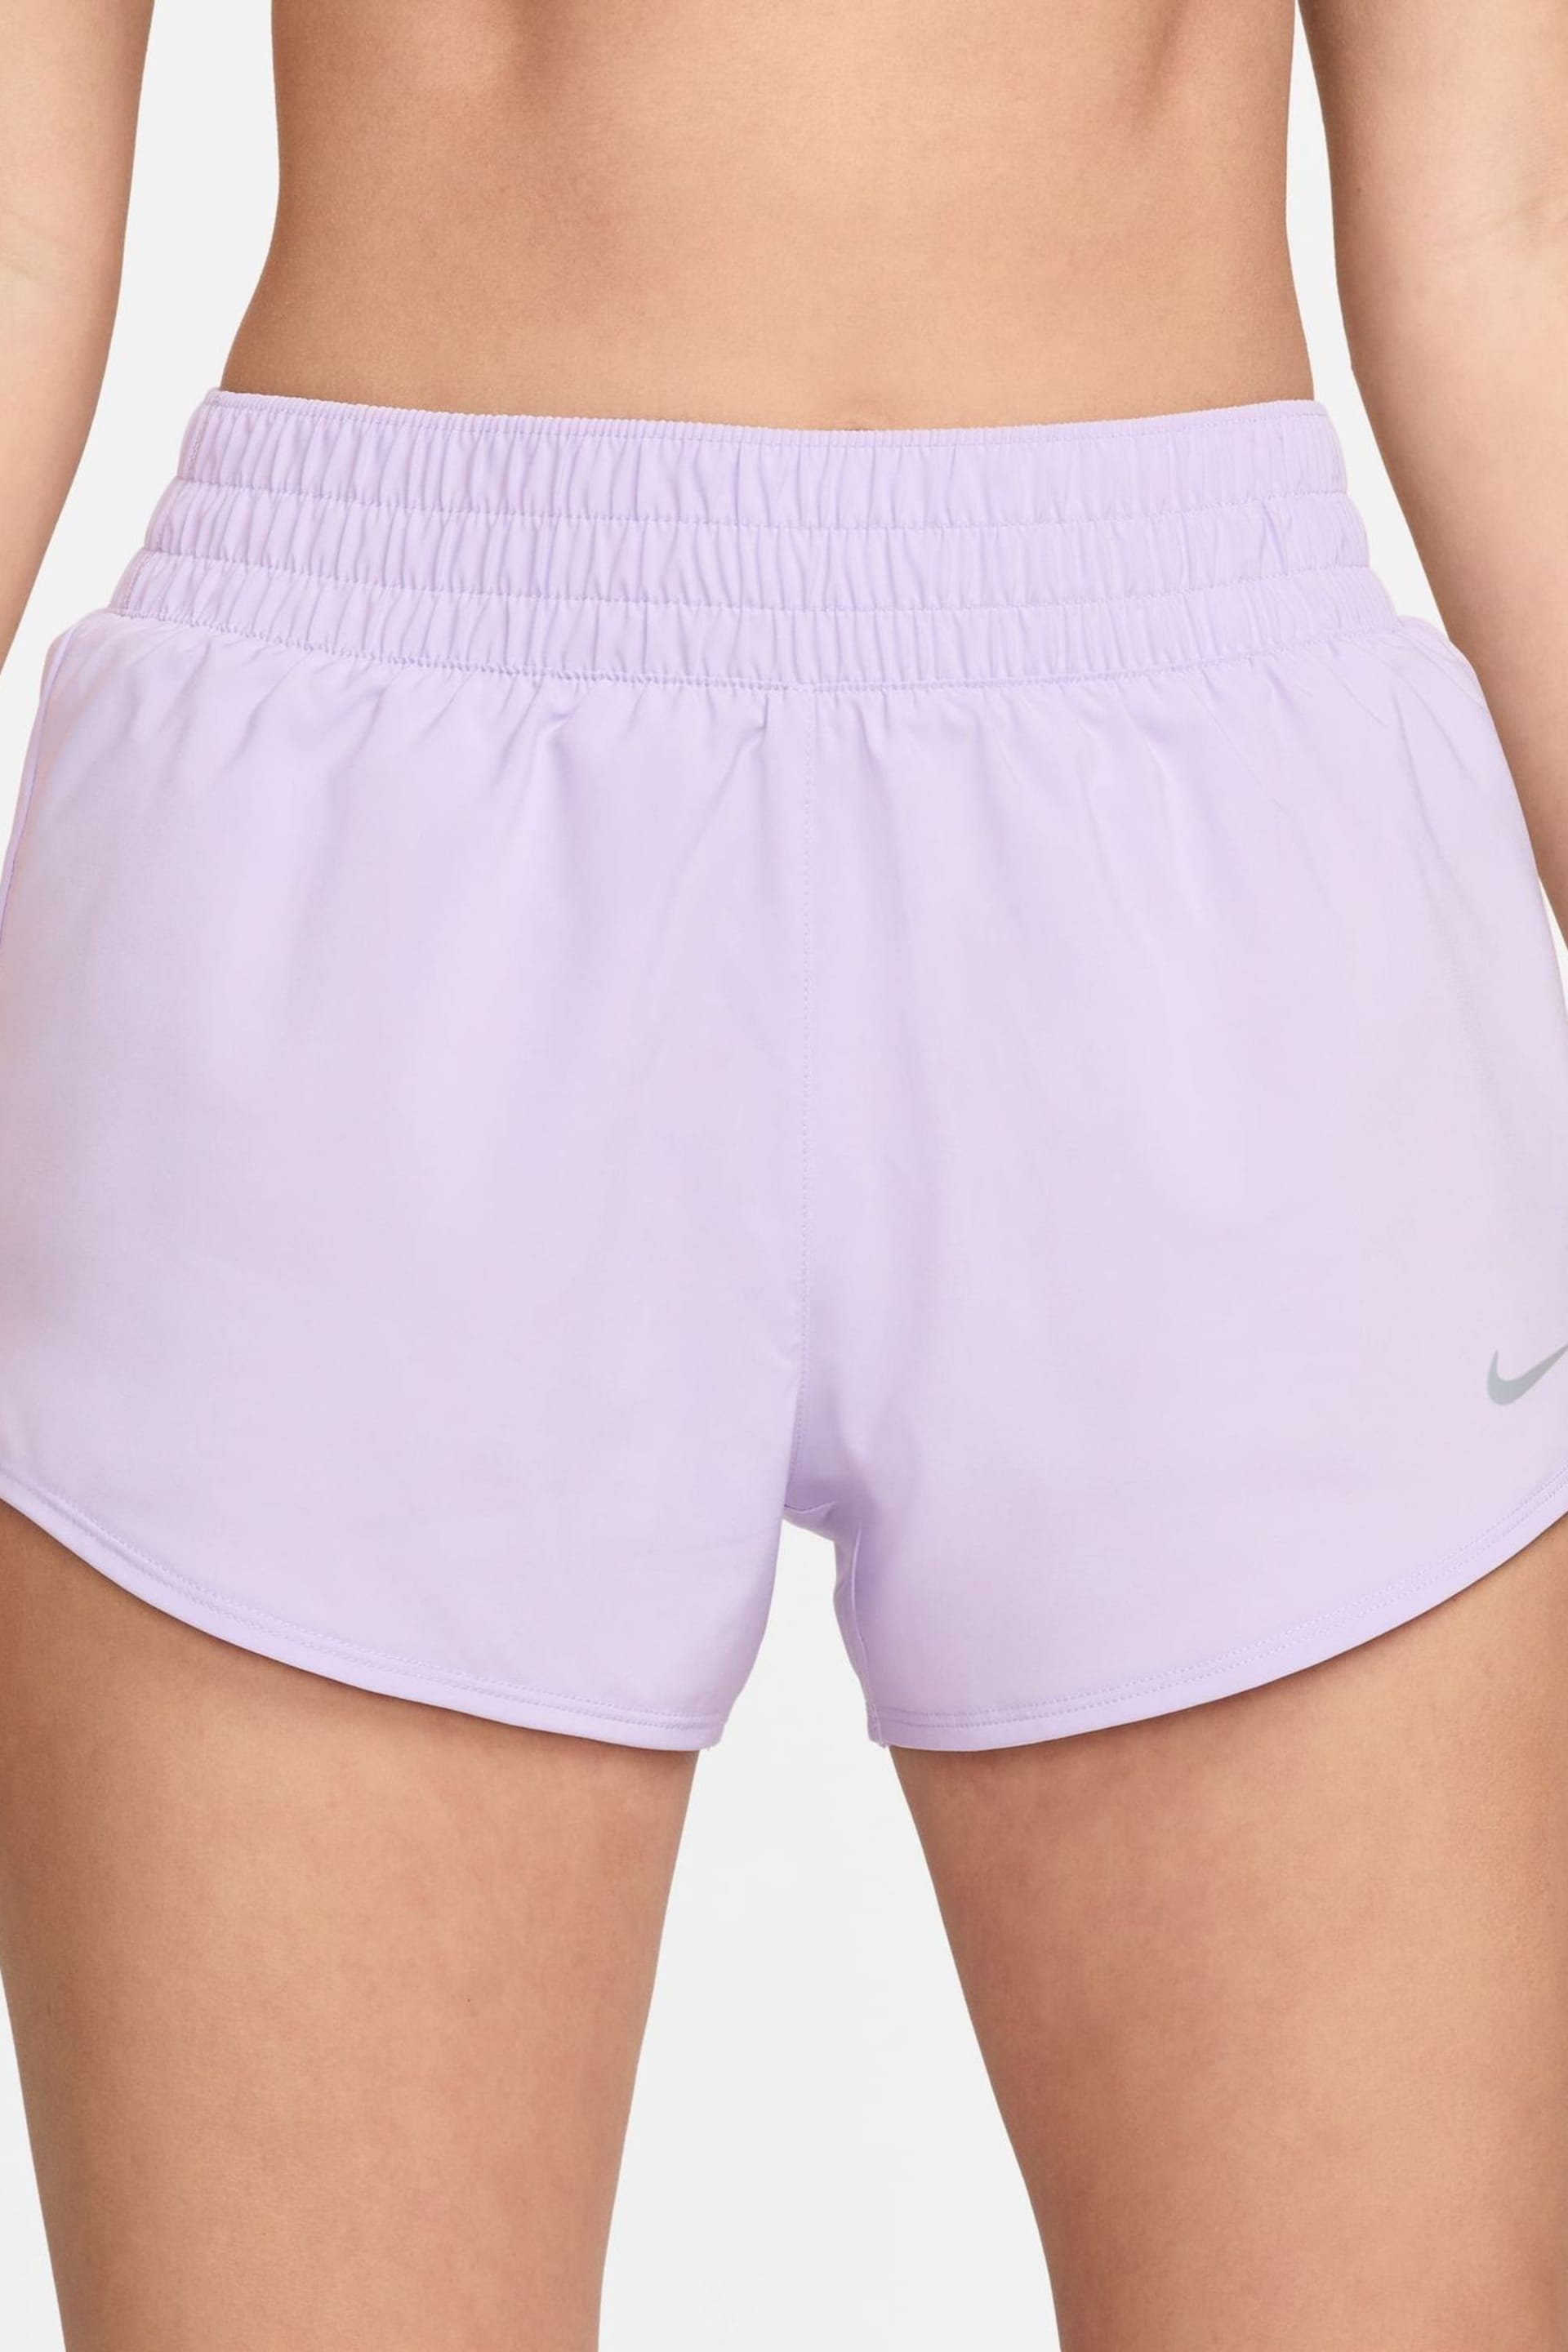 Nike Purple Dri-FIT One Mid Rise 3 Brief Lined Shorts - Image 2 of 7